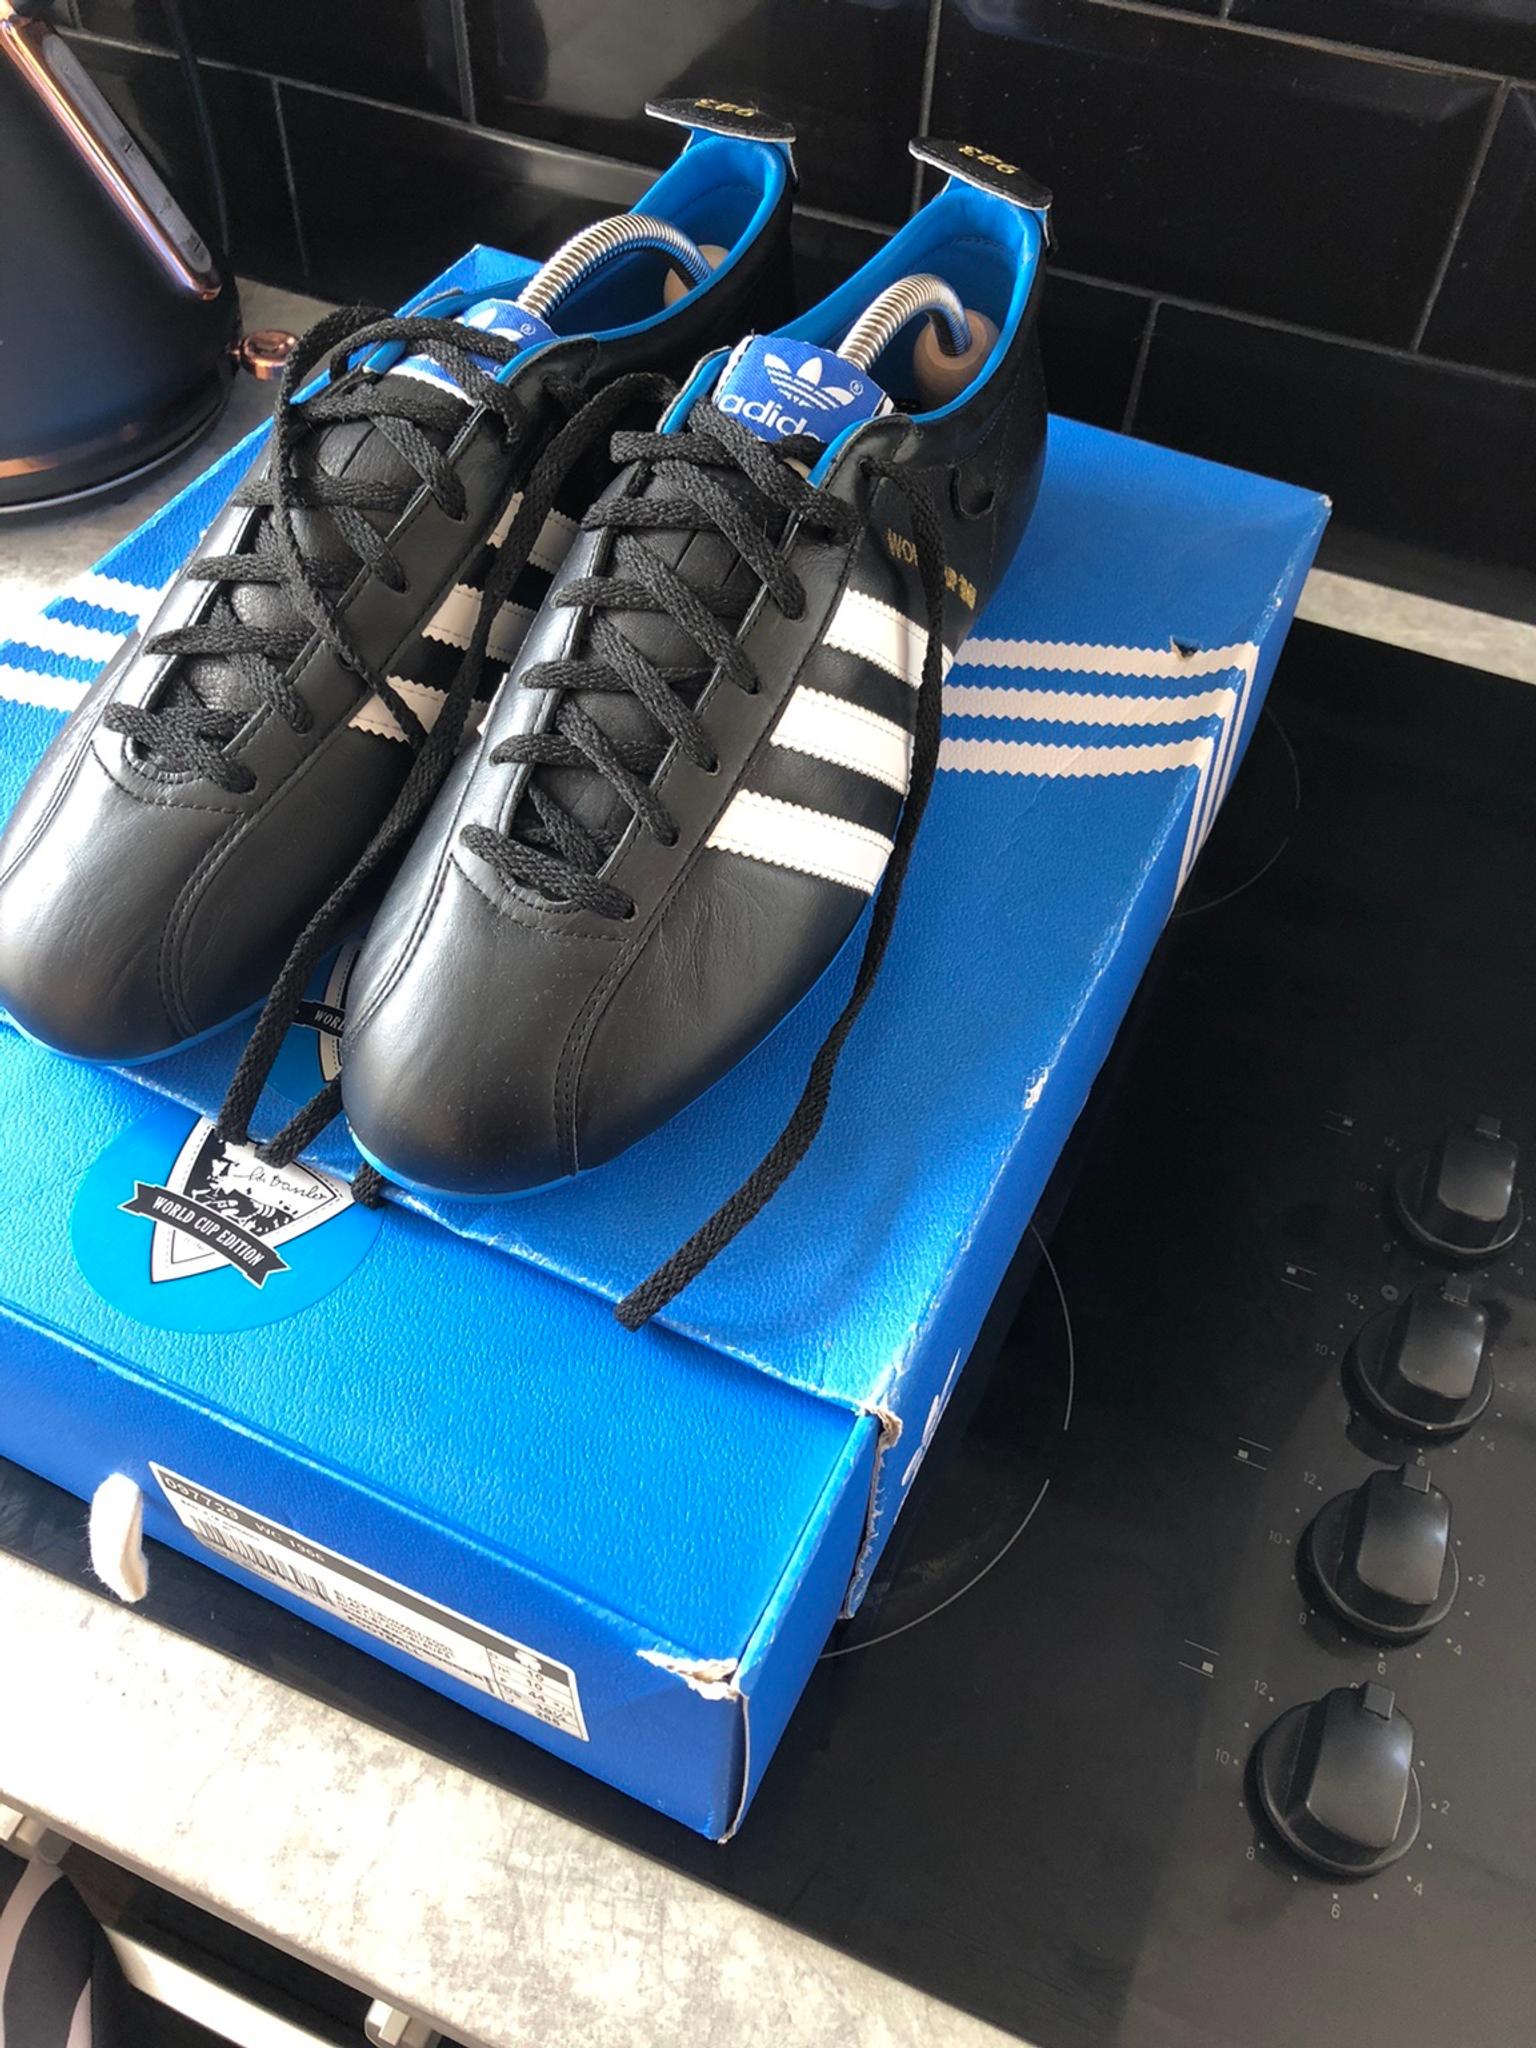 adidas world cup 1966 limited edition football boots